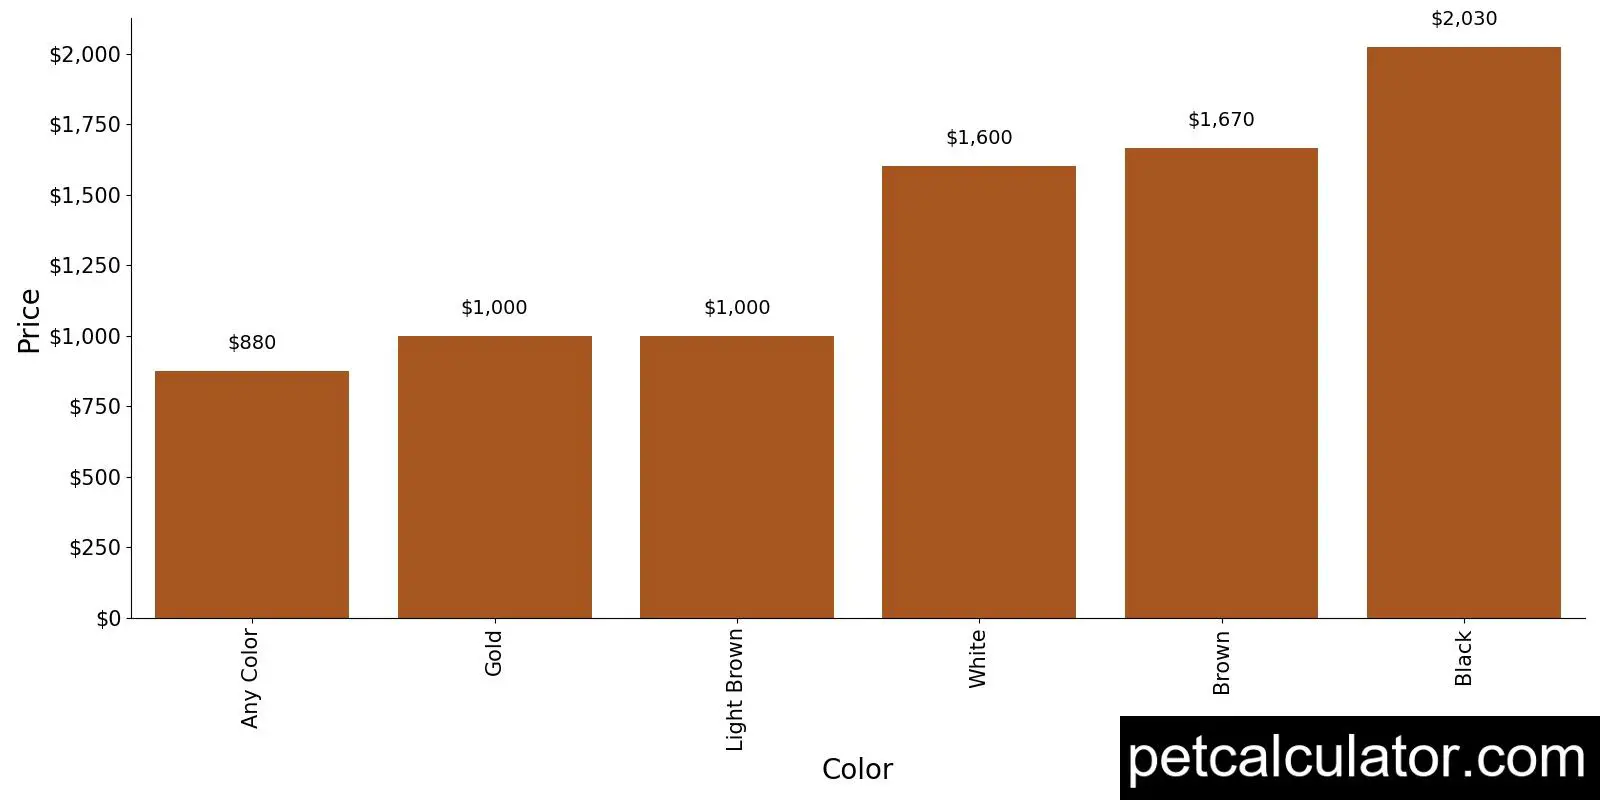 Price of Belgian Sheepdog by Color 